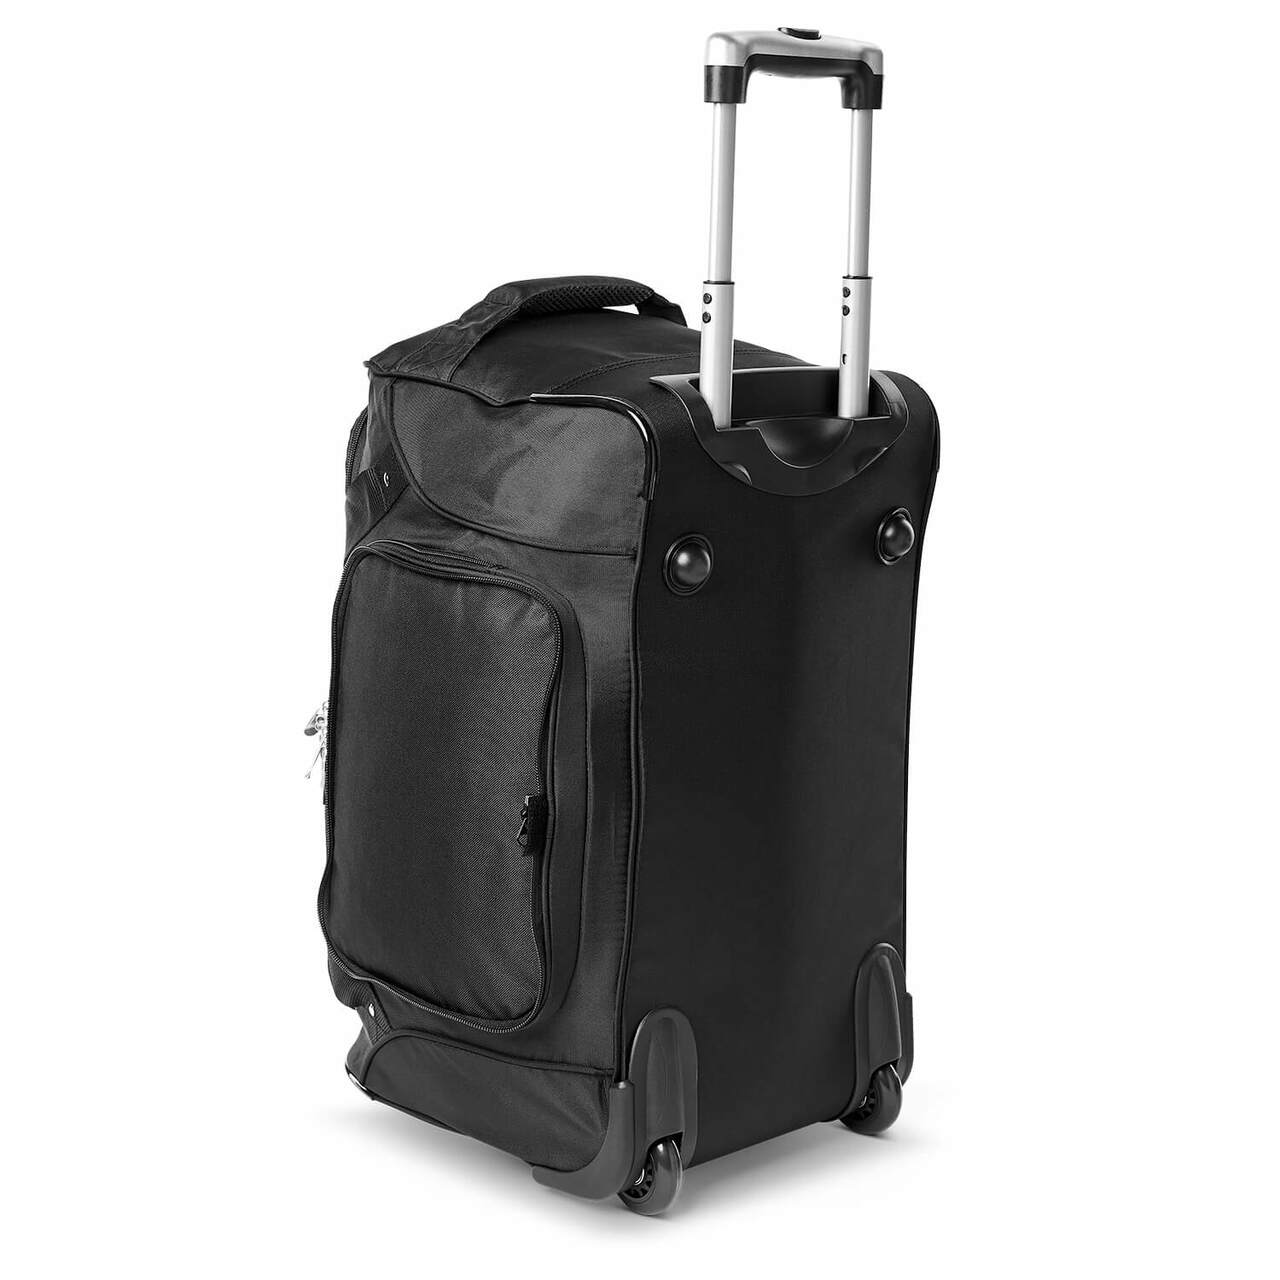 Detroit Lions Luggage | Detroit Lions Wheeled Carry On Luggage